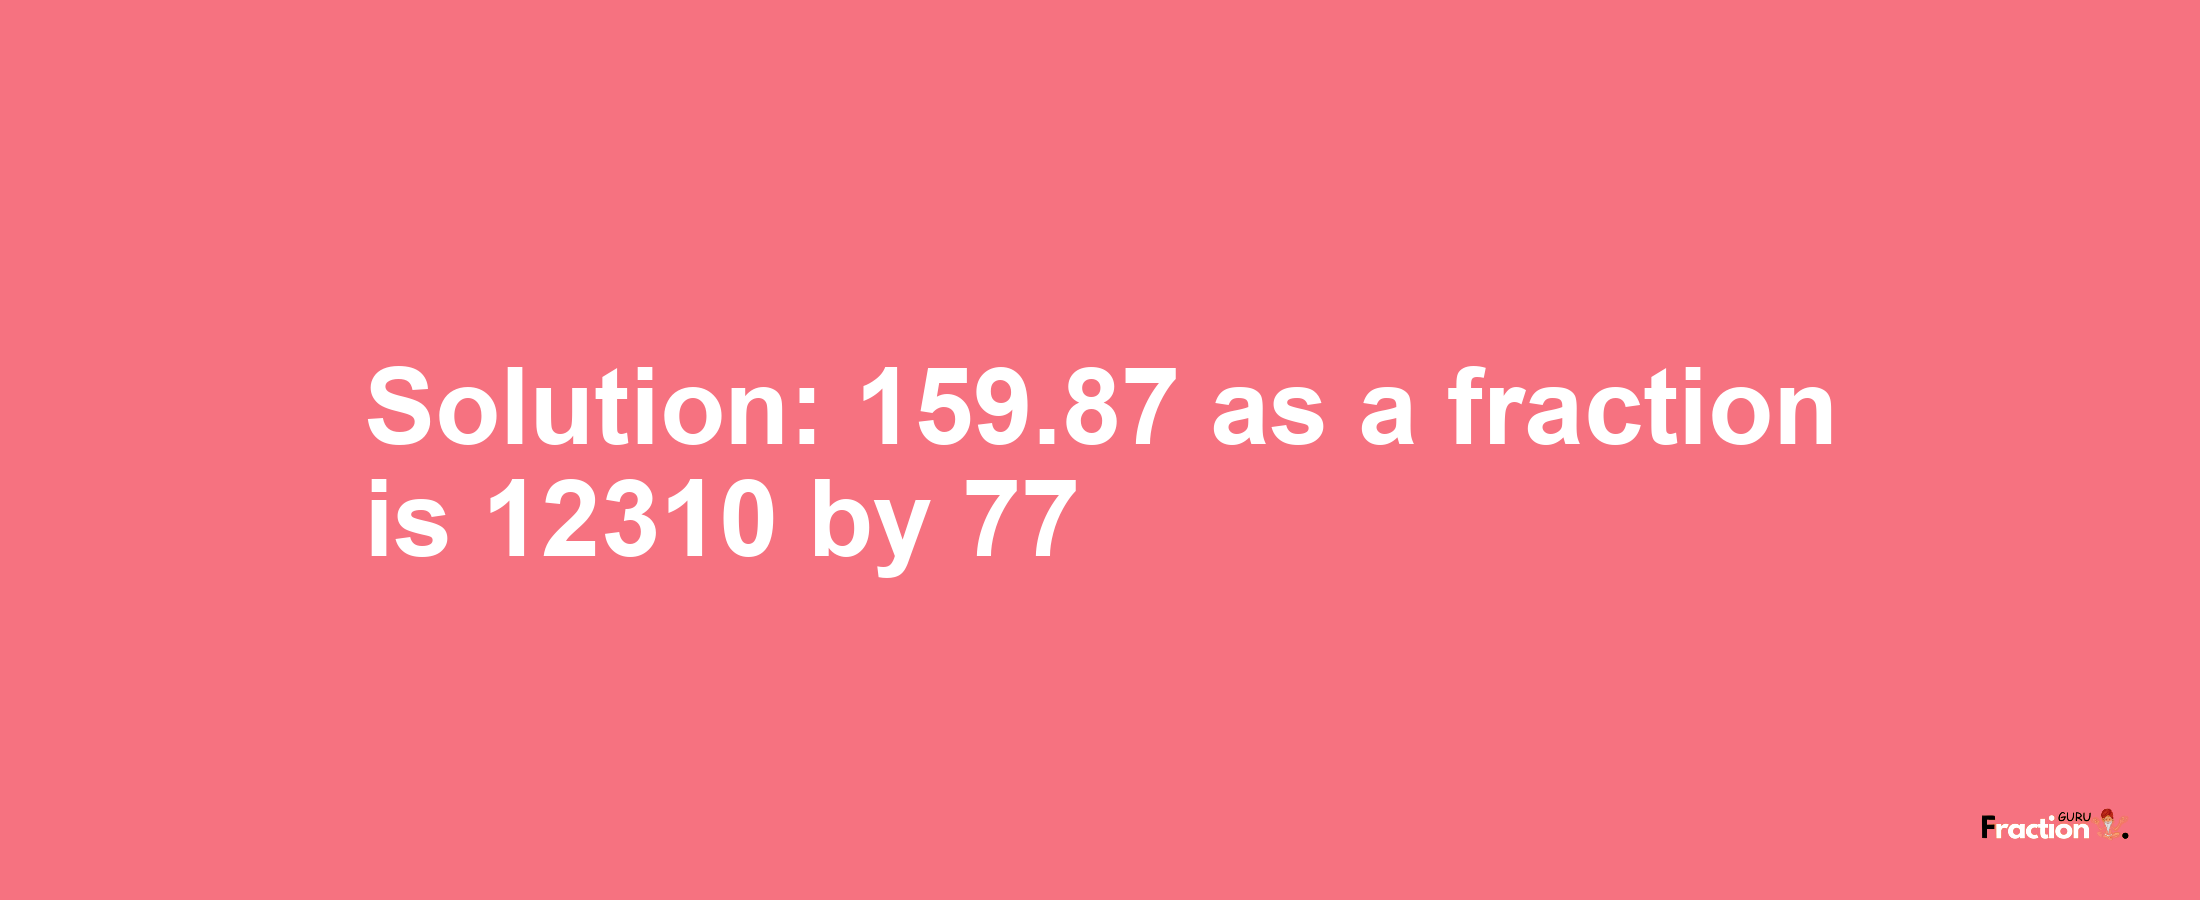 Solution:159.87 as a fraction is 12310/77